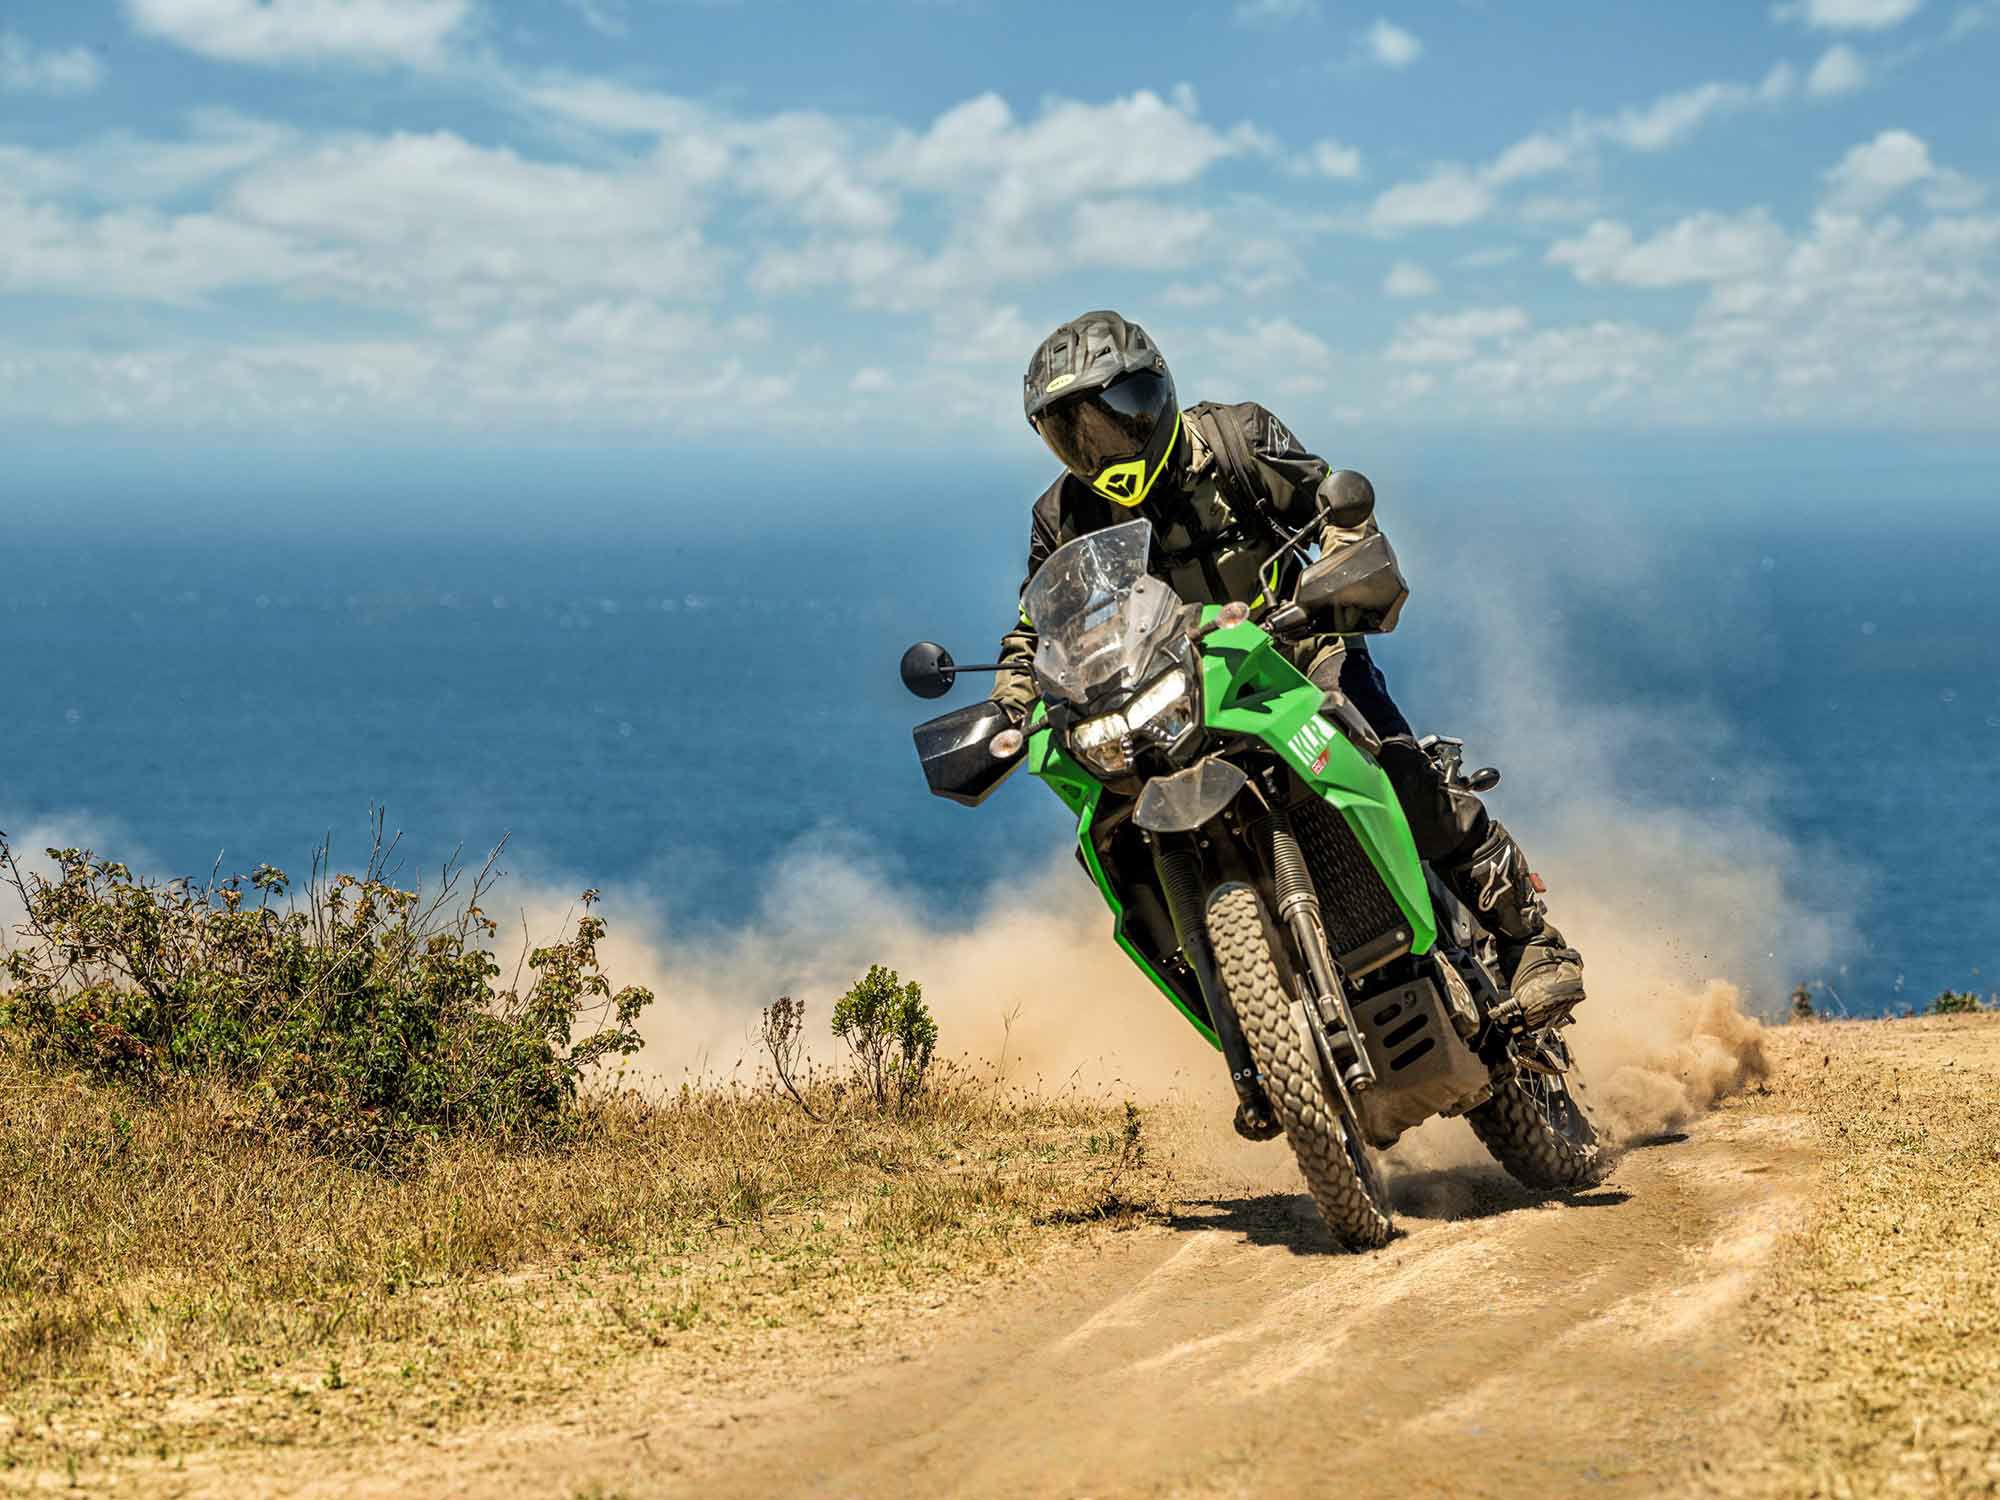 The Kawasaki KLR650 S expands the dual sport’s appeal to a wider audience.